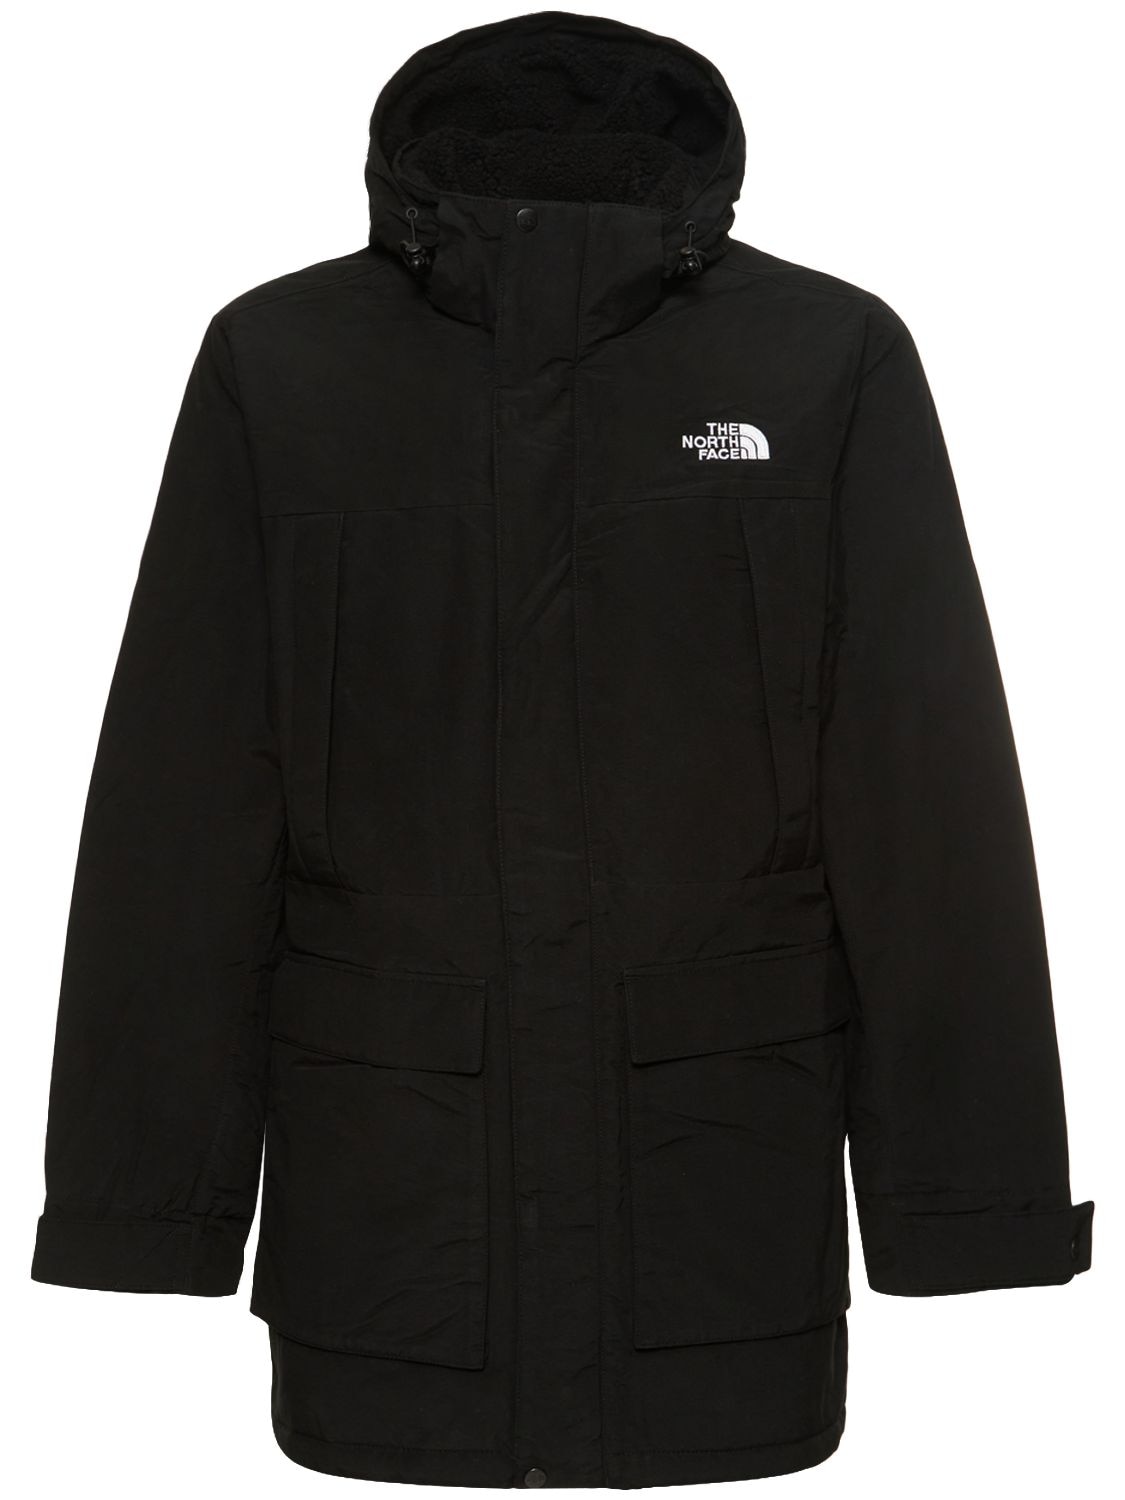 The North Face Katavi Insulated Jacket In Tnf Black | ModeSens